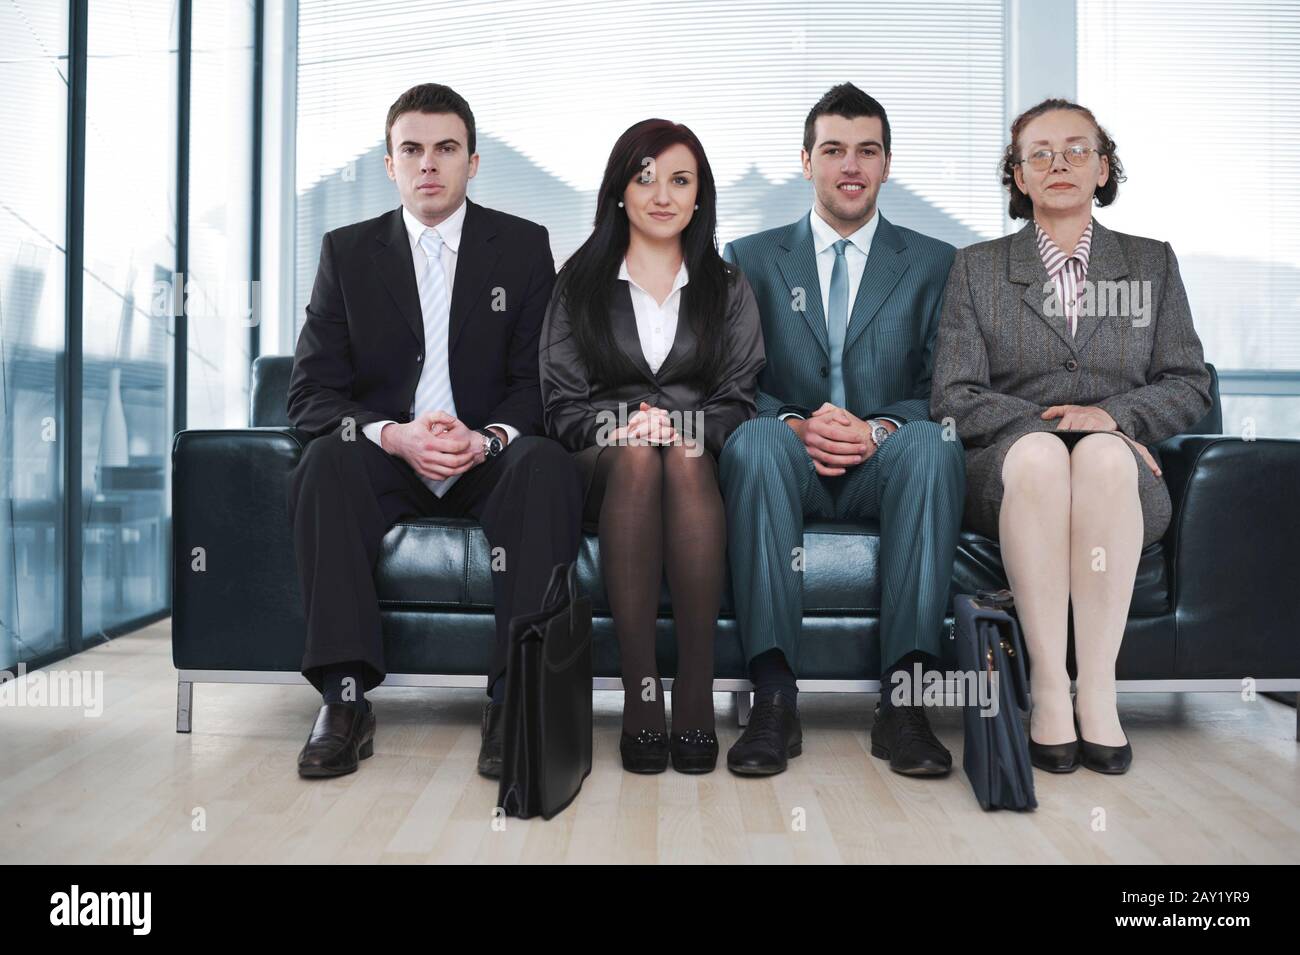 Four business people sitting in a row on sofa Stock Photo